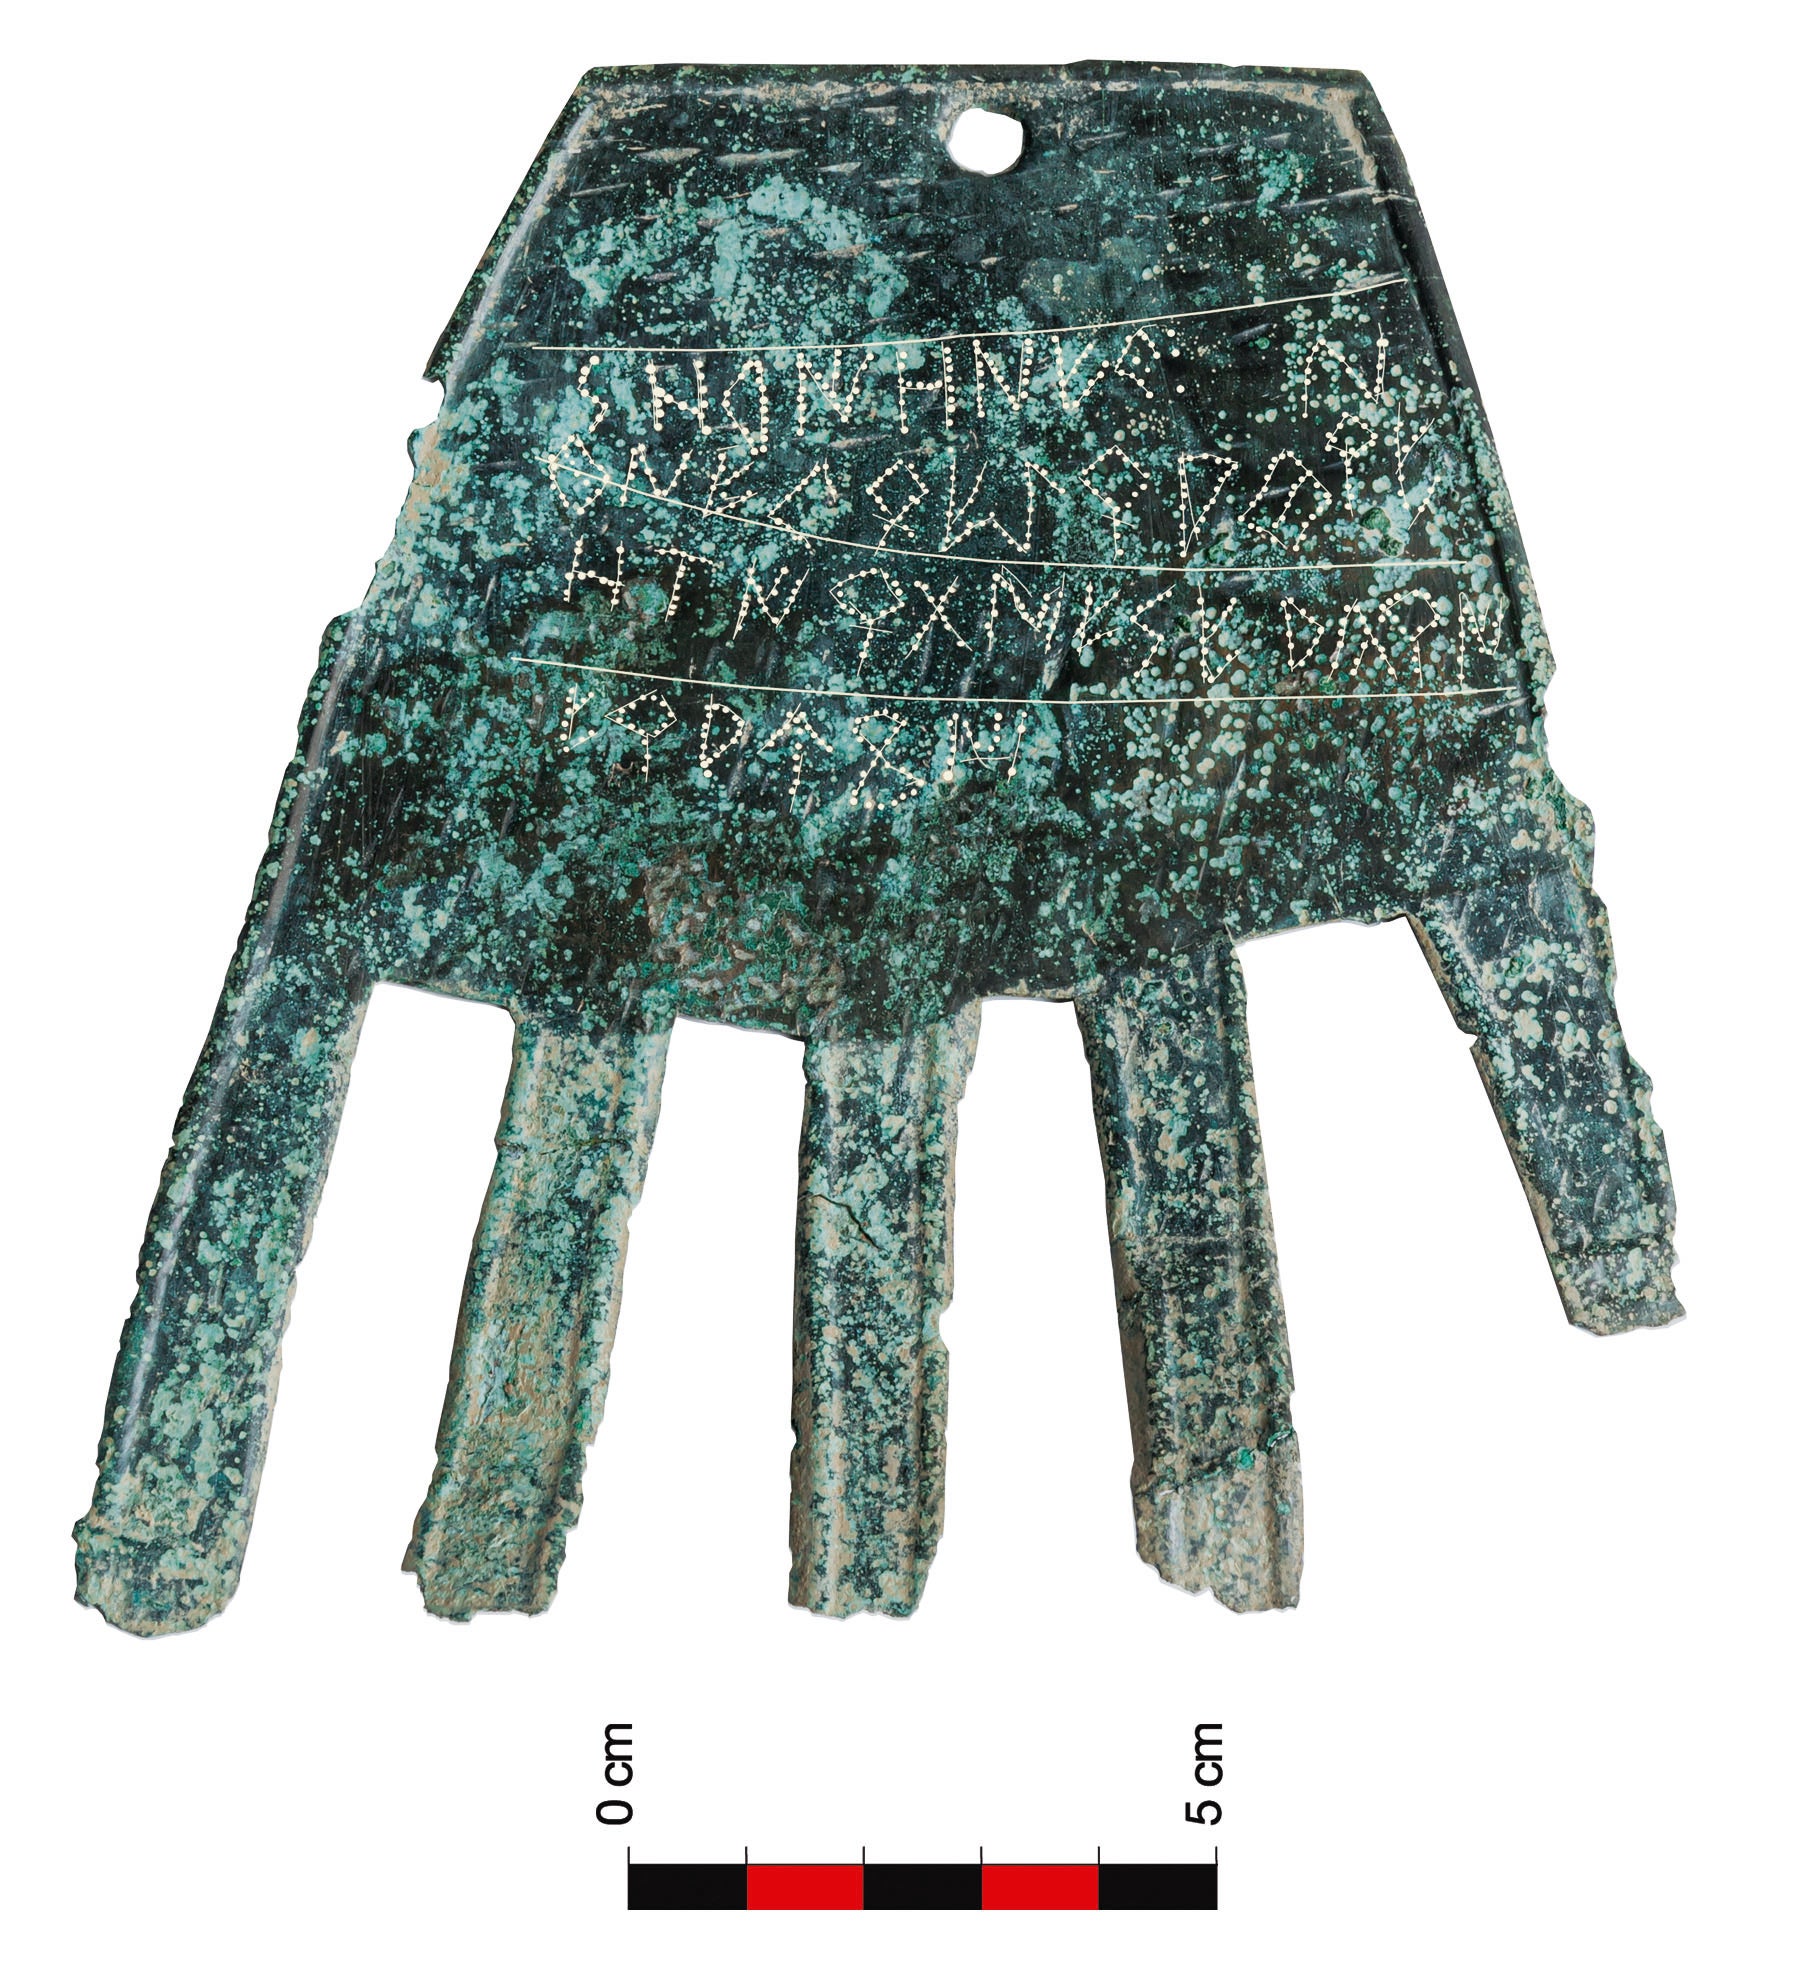 The 2100 year old sheet bronze ‘severed hand’ symbol, with its inscription probably referring to a ‘good fortune’ deity